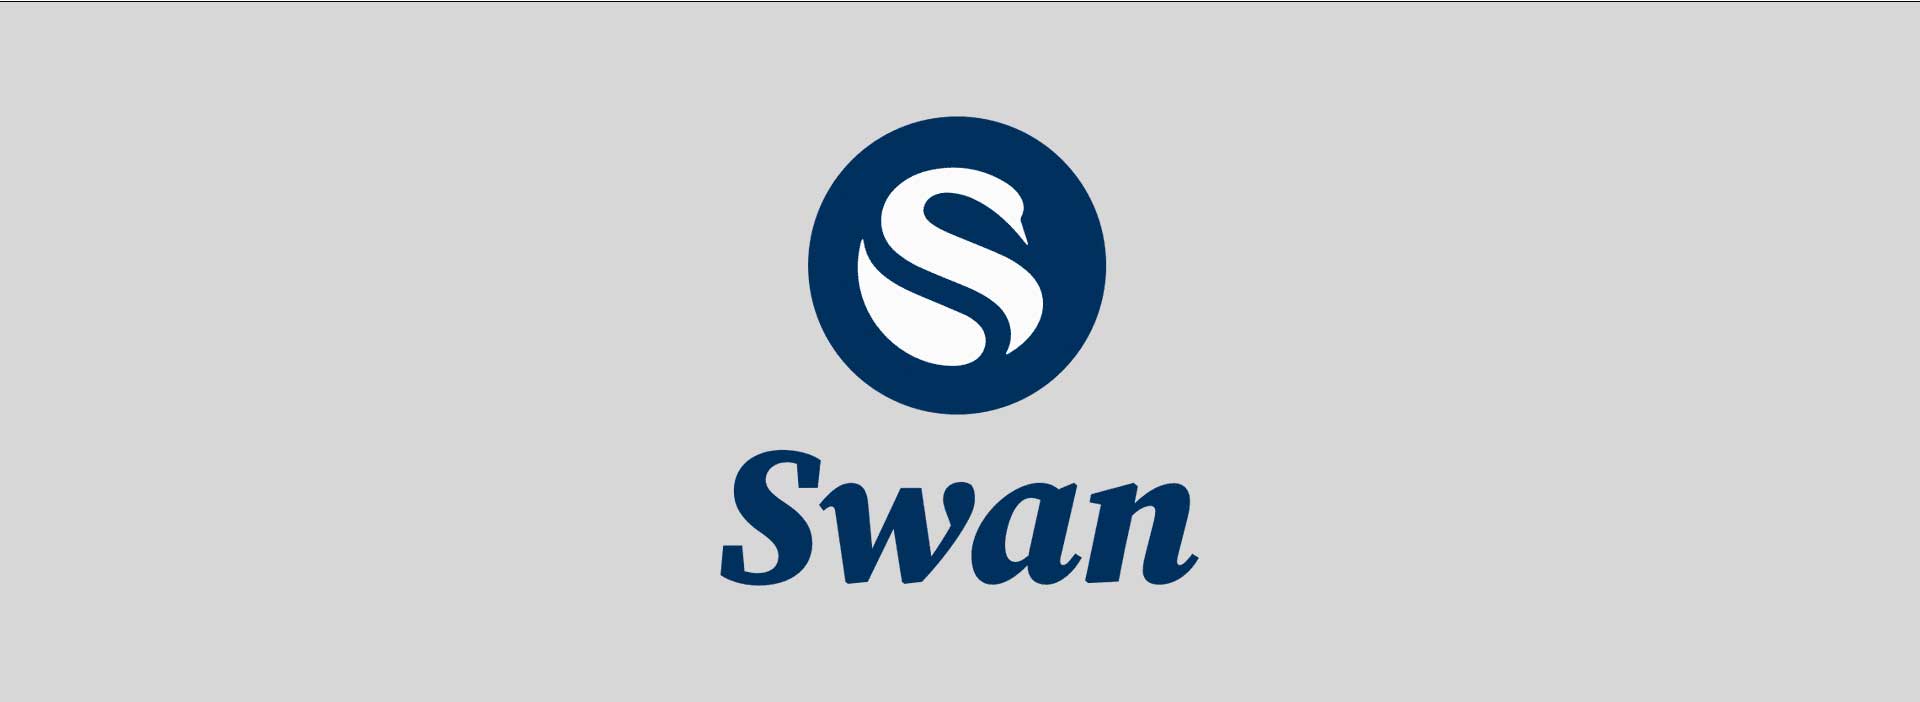 Swan Bitcoin Offers Safety Plus Recurring Purchases